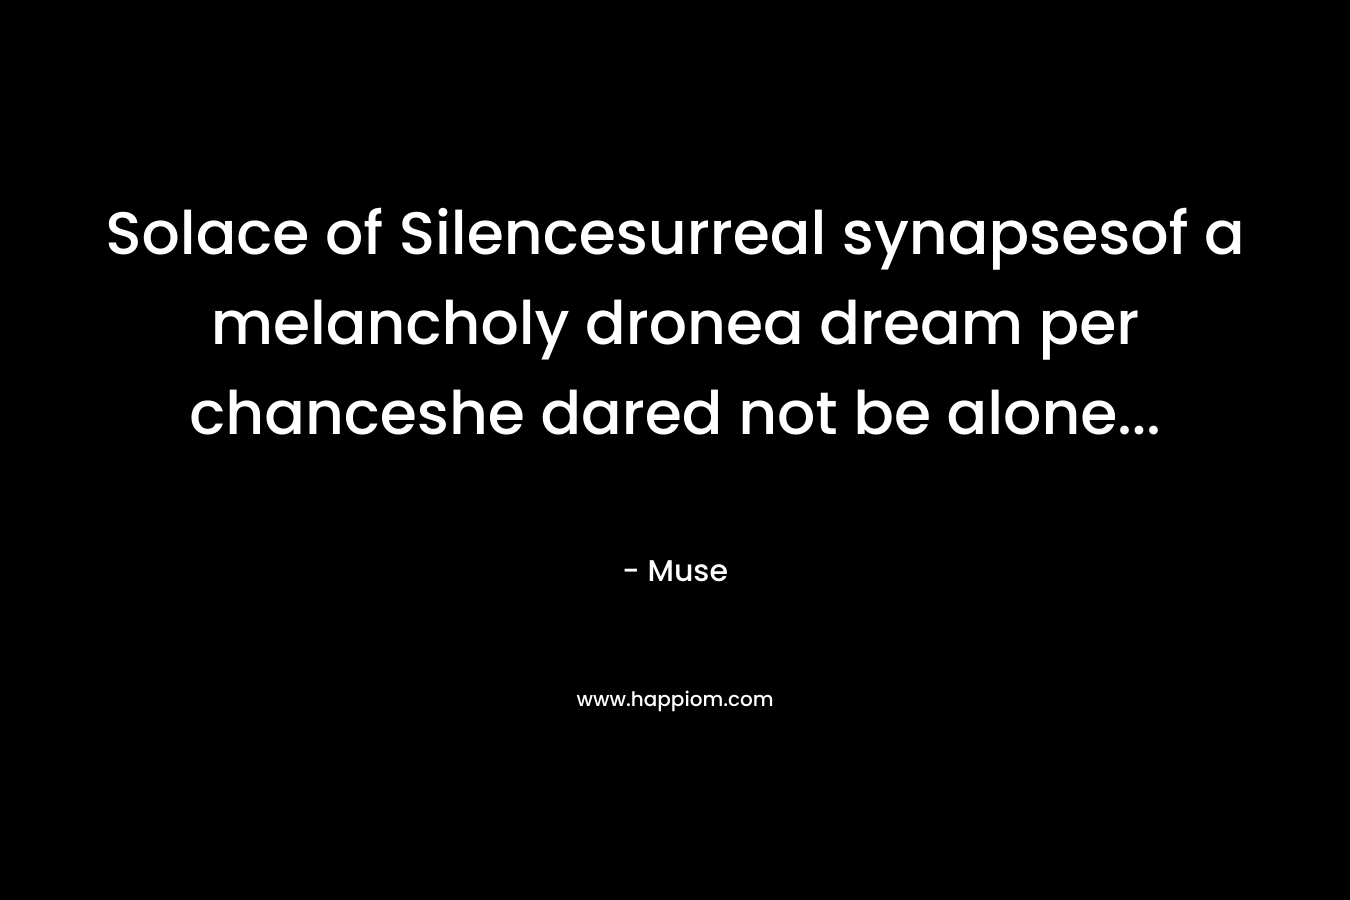 Solace of Silencesurreal synapsesof a melancholy dronea dream per chanceshe dared not be alone… – Muse